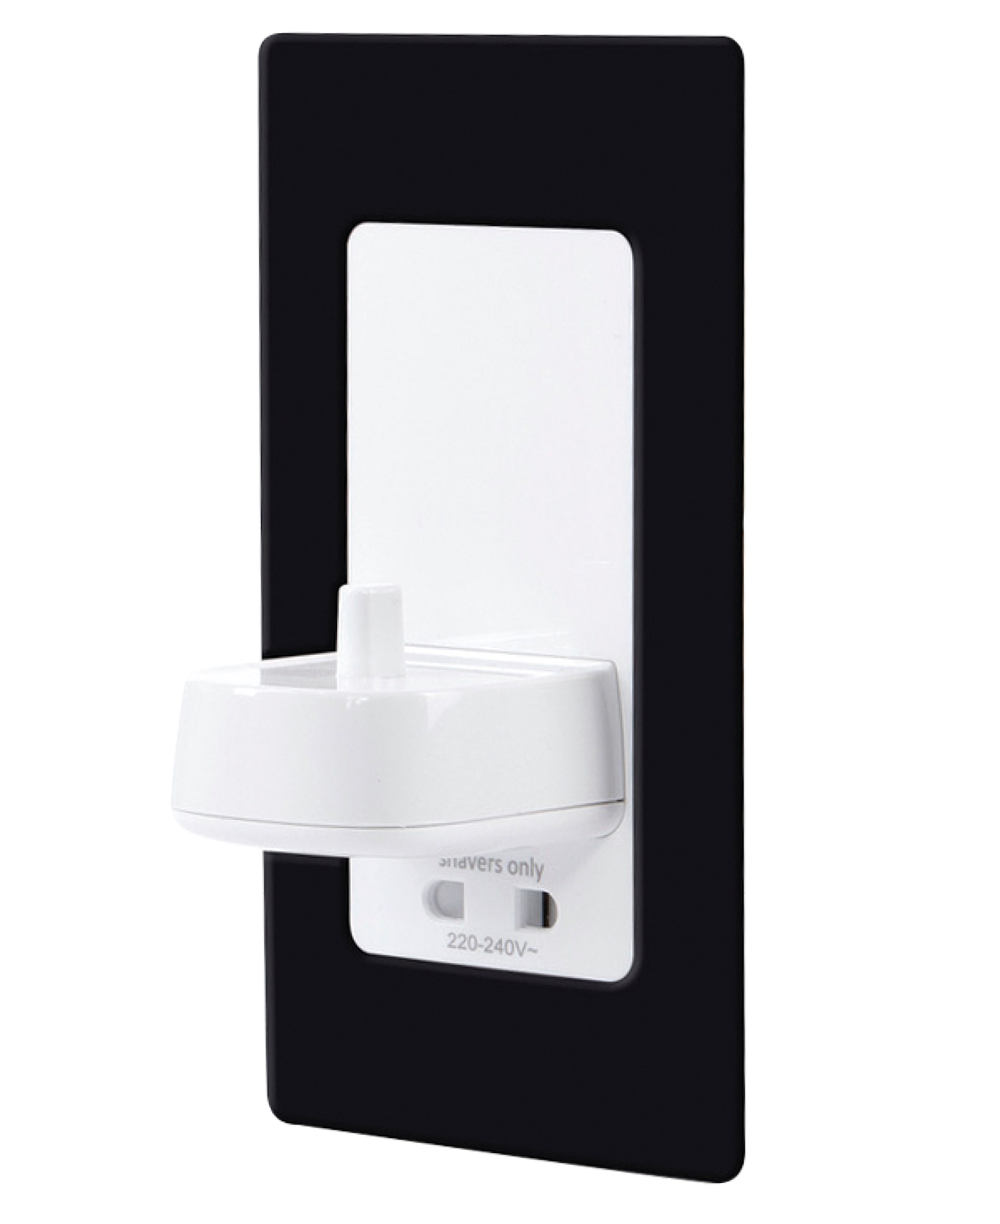 ProofVision In-Wall Single Electric Toothbrush Charger and Shaver Socket